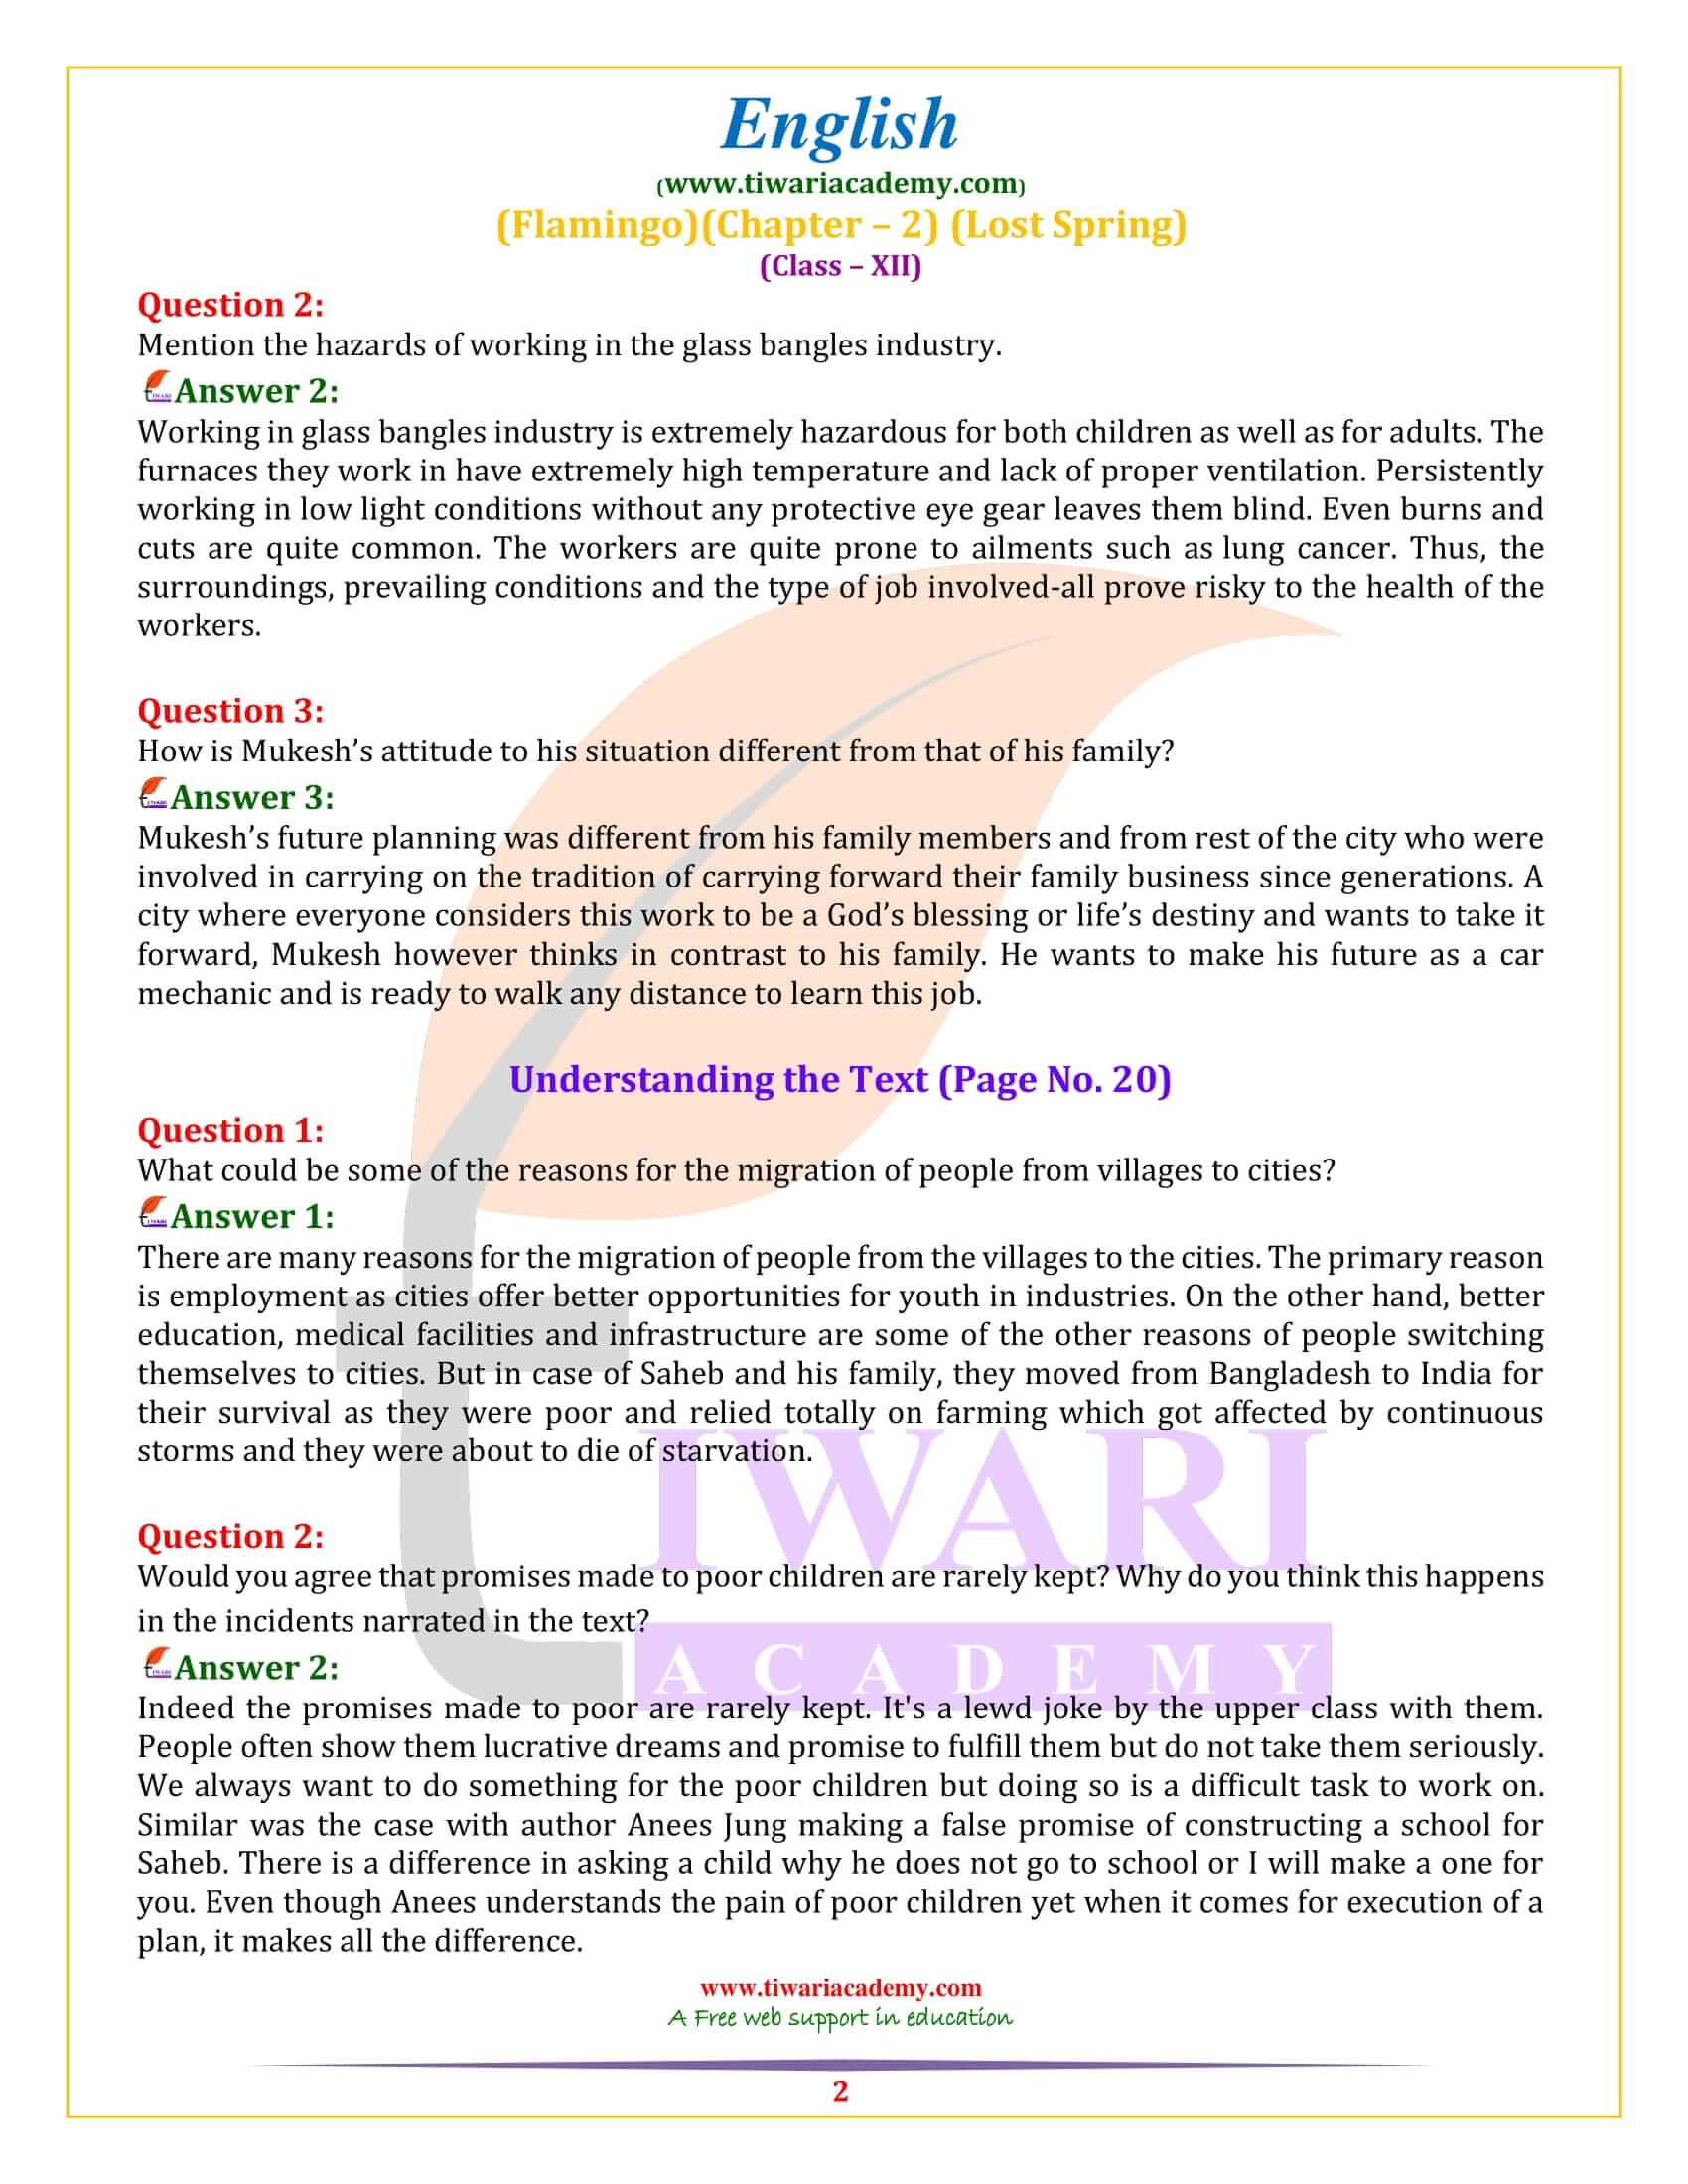 NCERT Solutions for Class 12 English Chapter 2